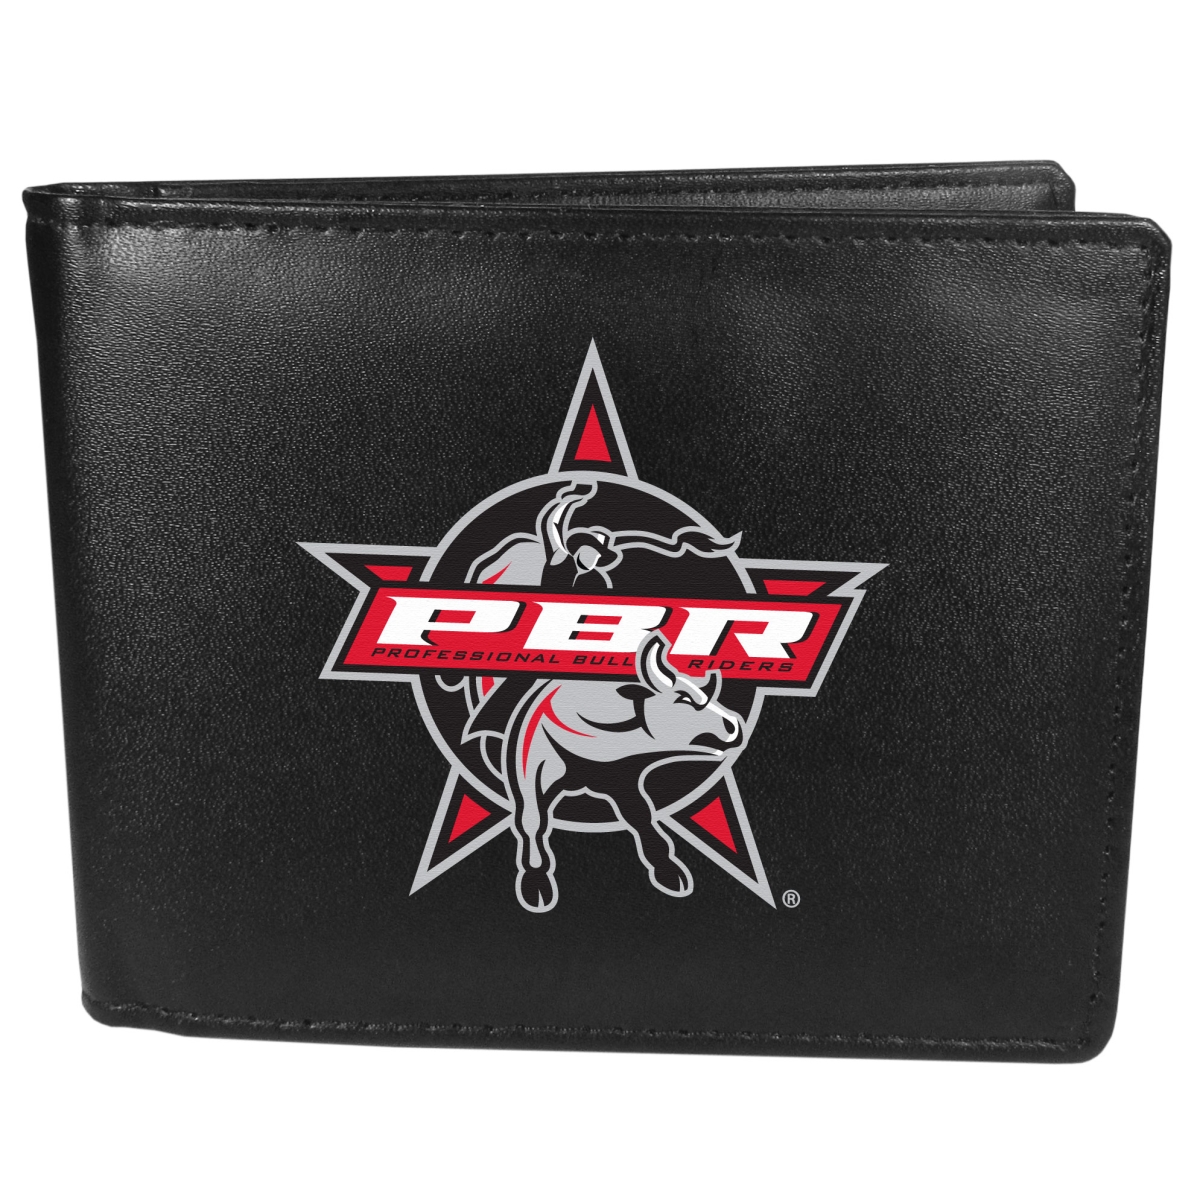 Picture of Siskiyou PLBF1 Male Licensed Collectibles PBR Leather Bi-fold Logo Large Wallet